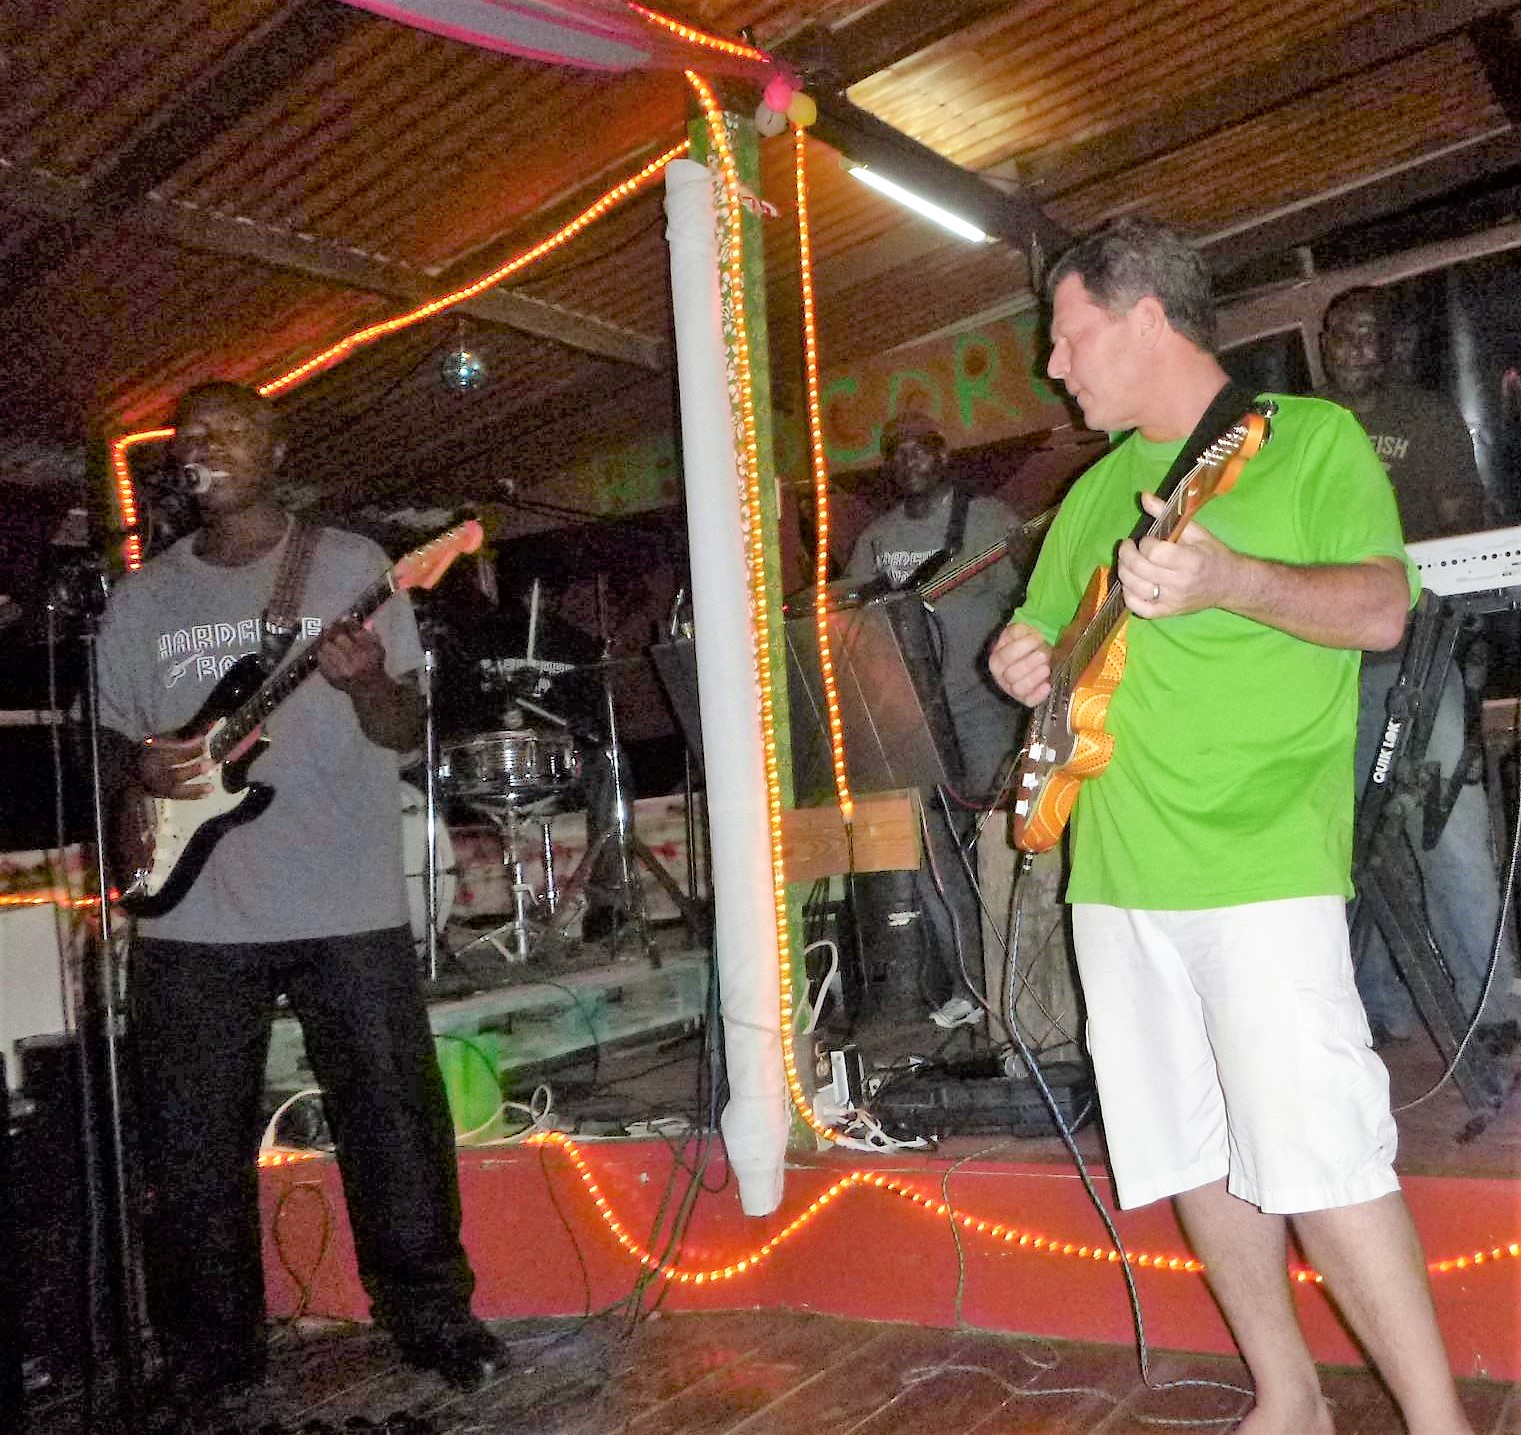 Mike Aronson playing guitar on stage with a Reggae band in Antigua